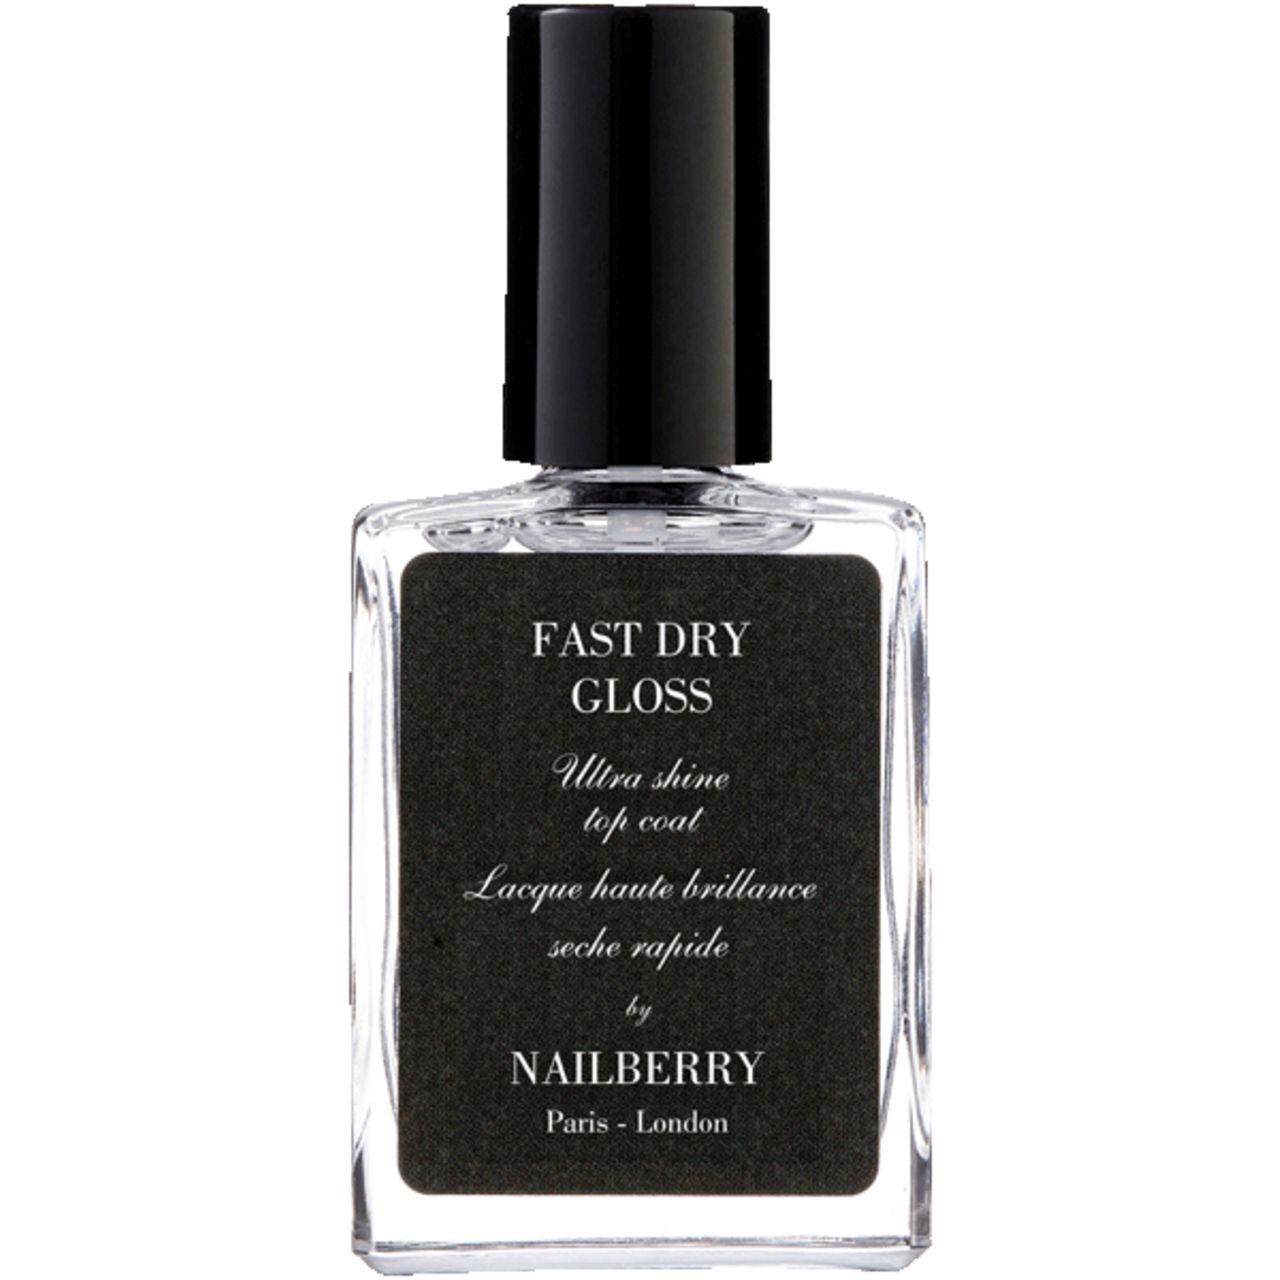 NAILBERRY, Fast Dry Gloss